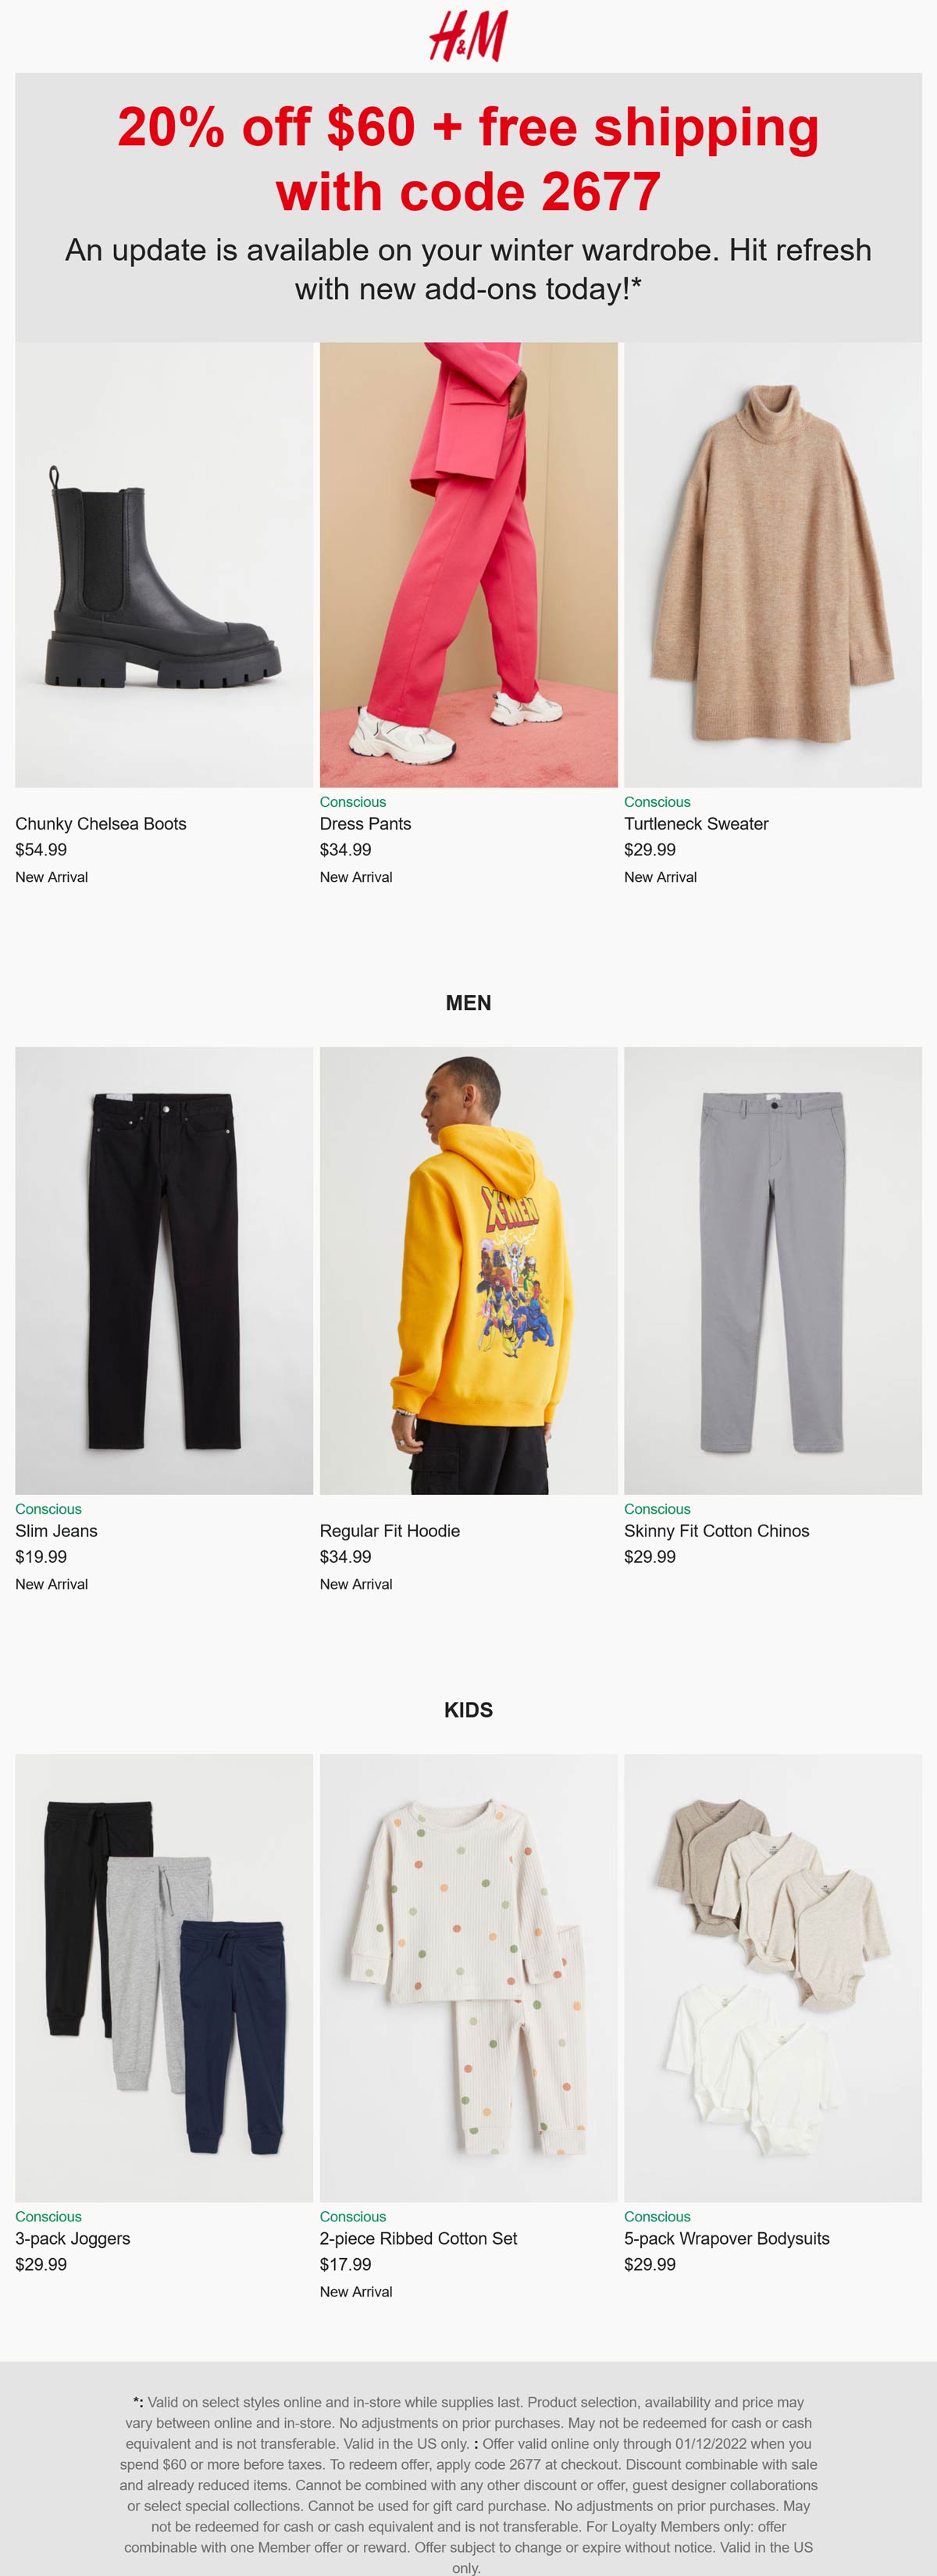 H&M stores Coupon  20% off $60 today at H&M via promo code 2677 #hm 